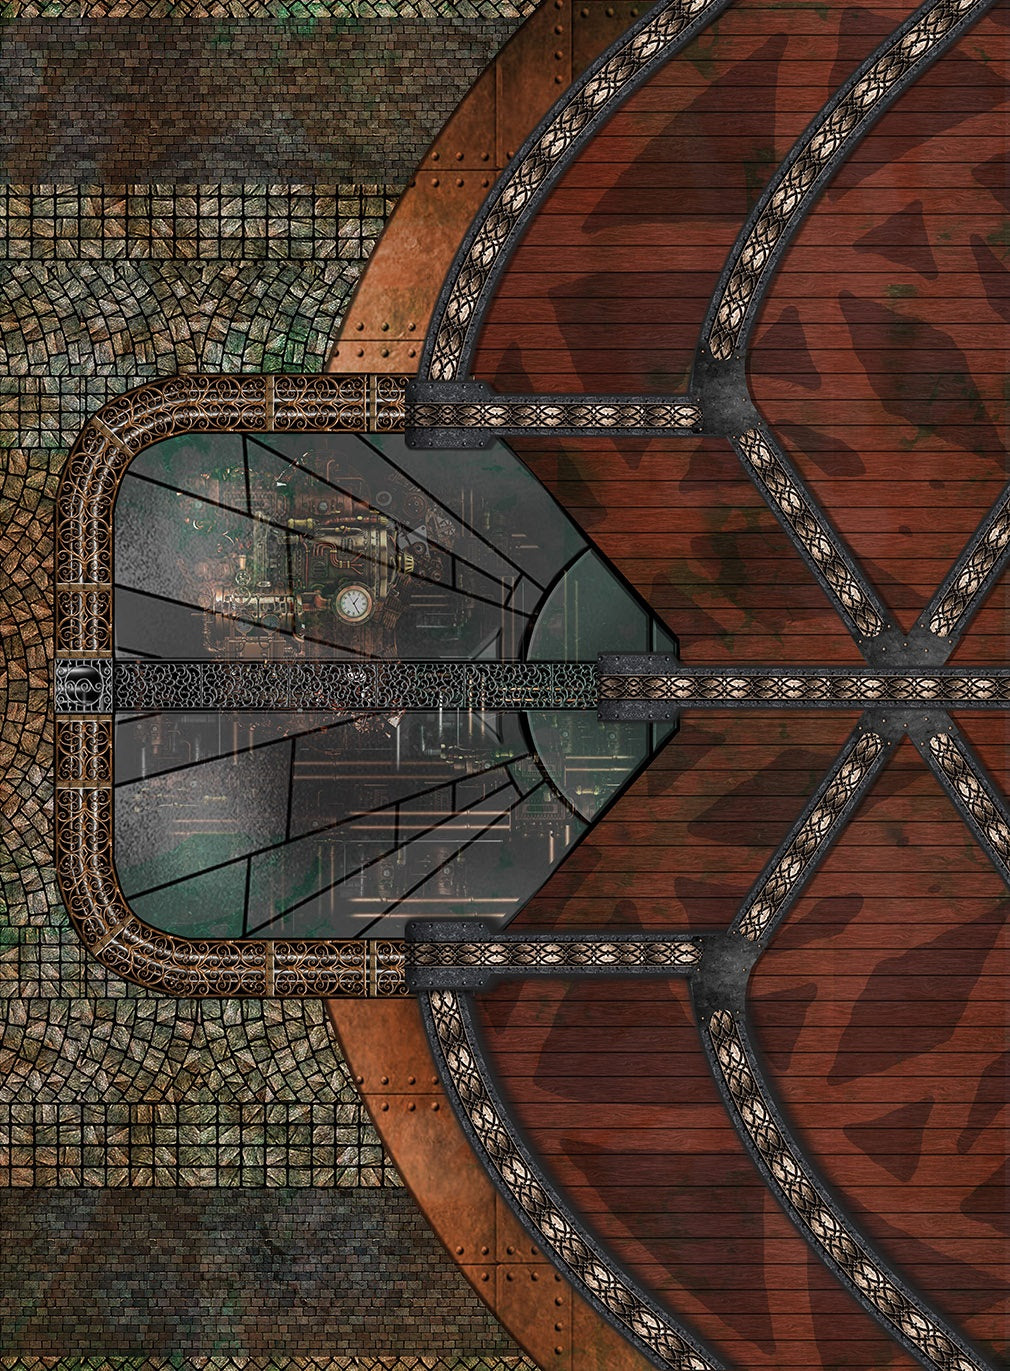 Skirmish Mats Steampunk Skyport version B with glass, cogs, and wood plus cobblestone. Perfect steampunk play mat. 